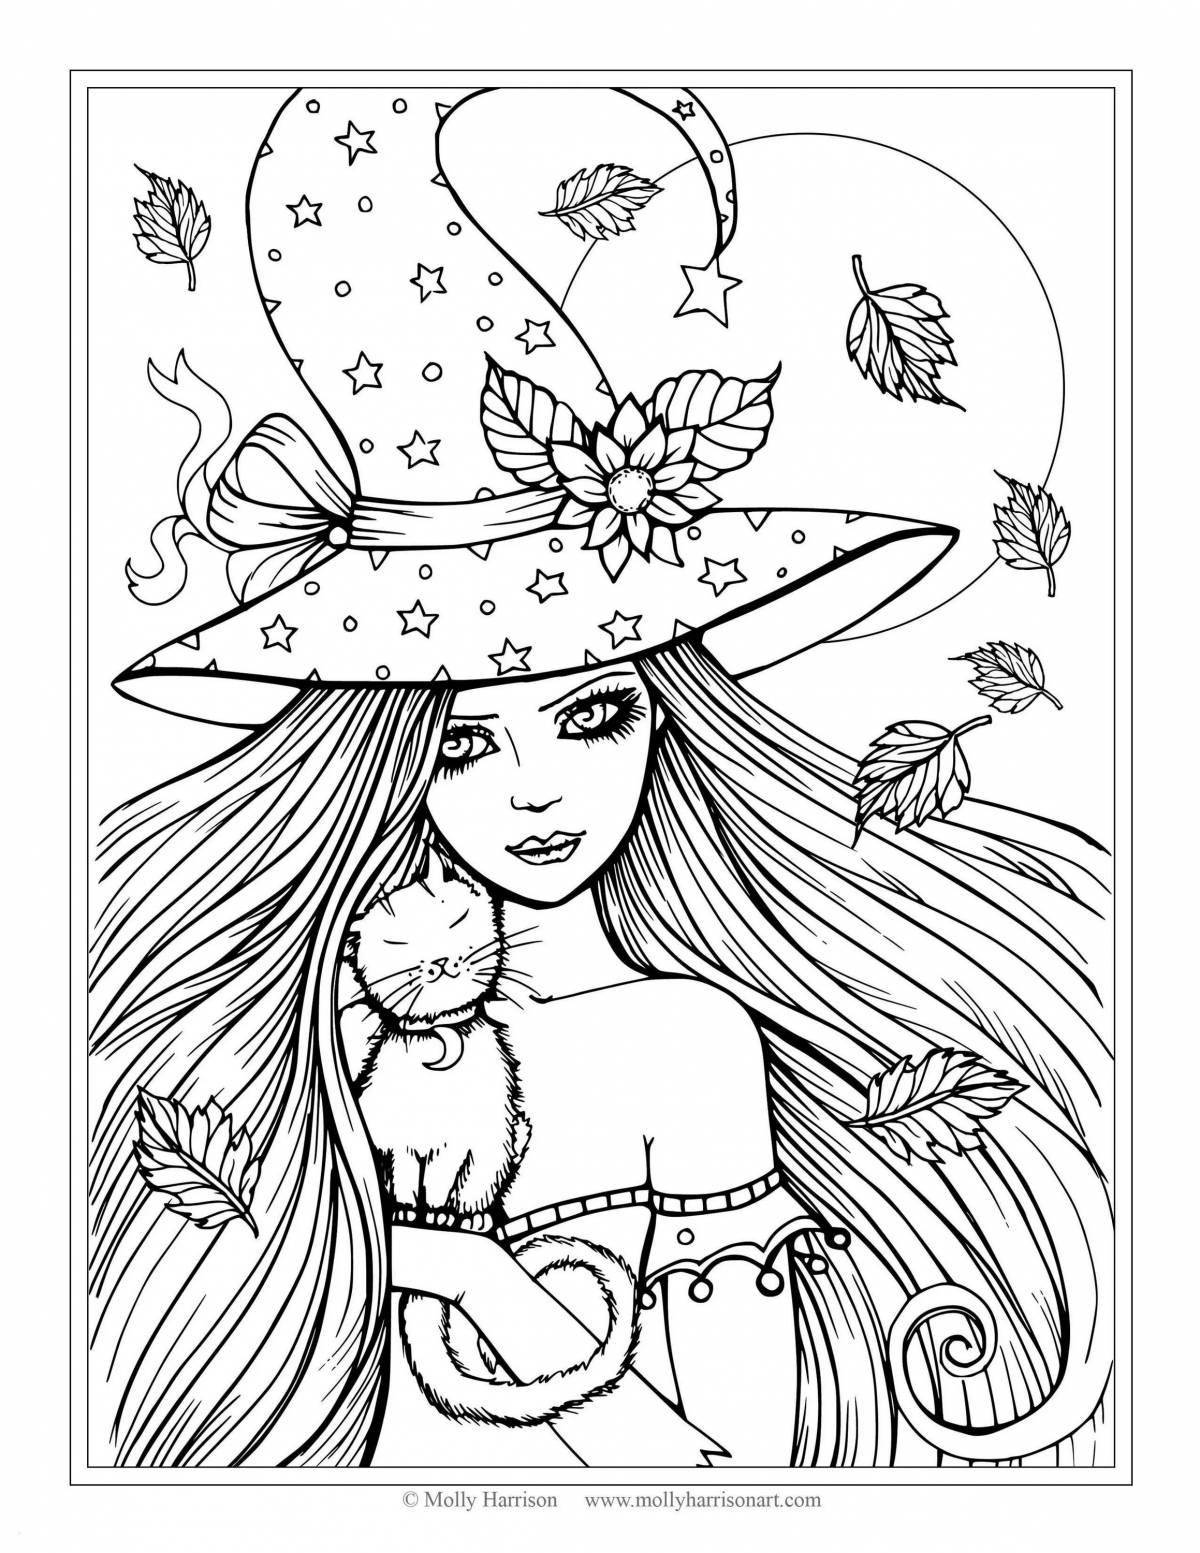 Energy coloring page 11 for girls